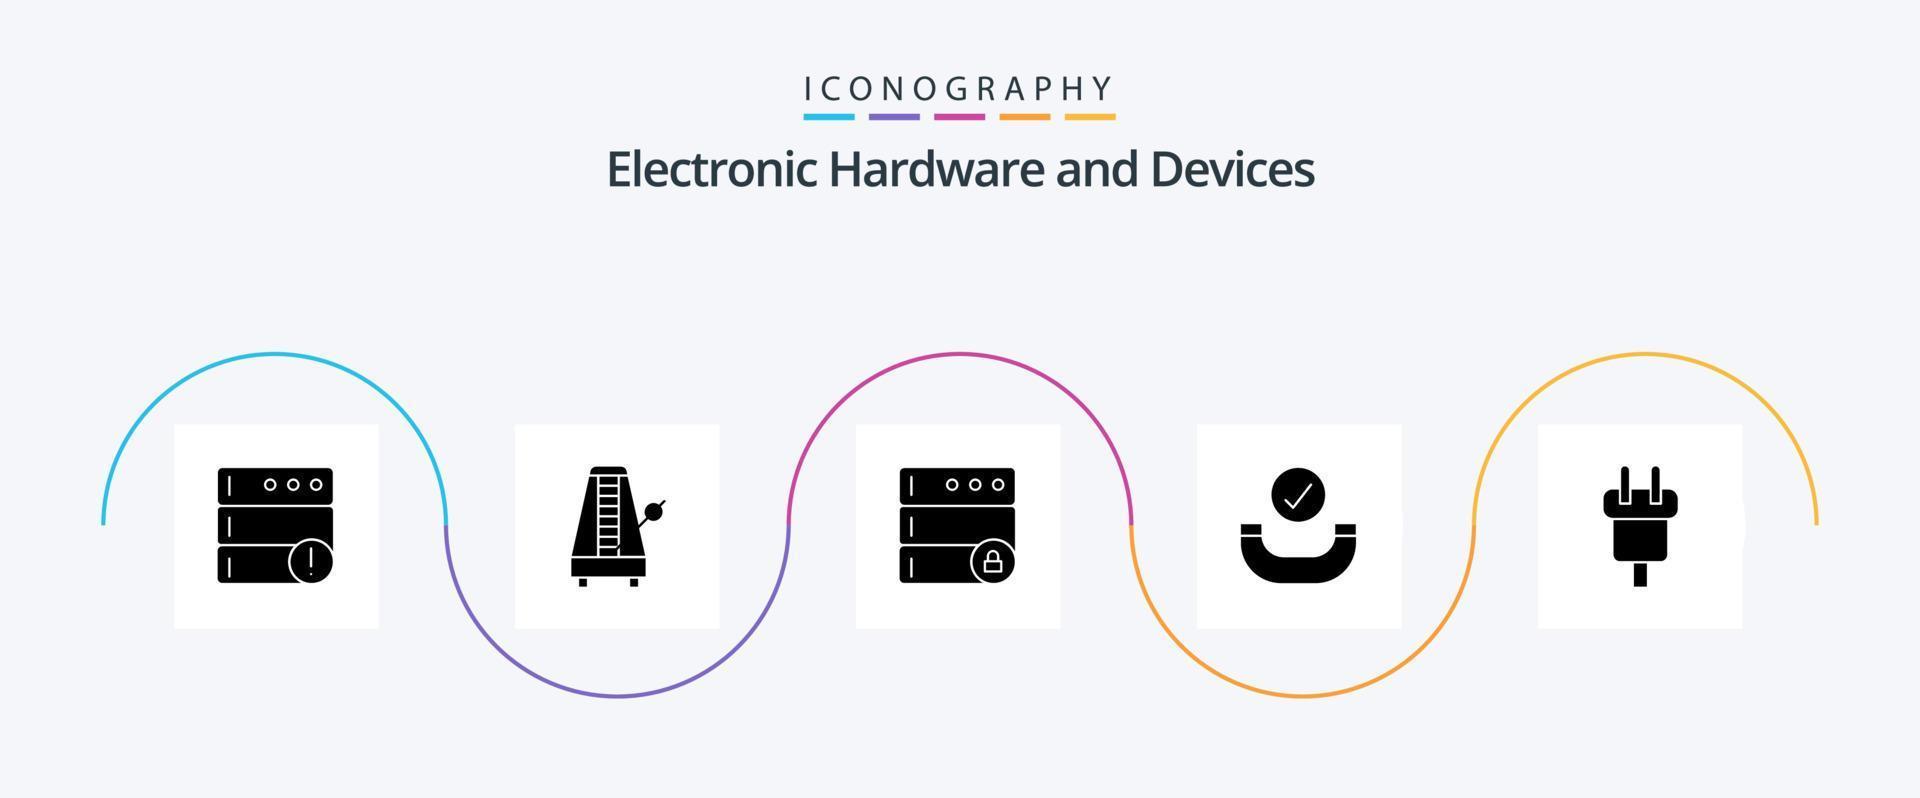 Devices Glyph 5 Icon Pack Including electric. connector. database. charge. checked vector